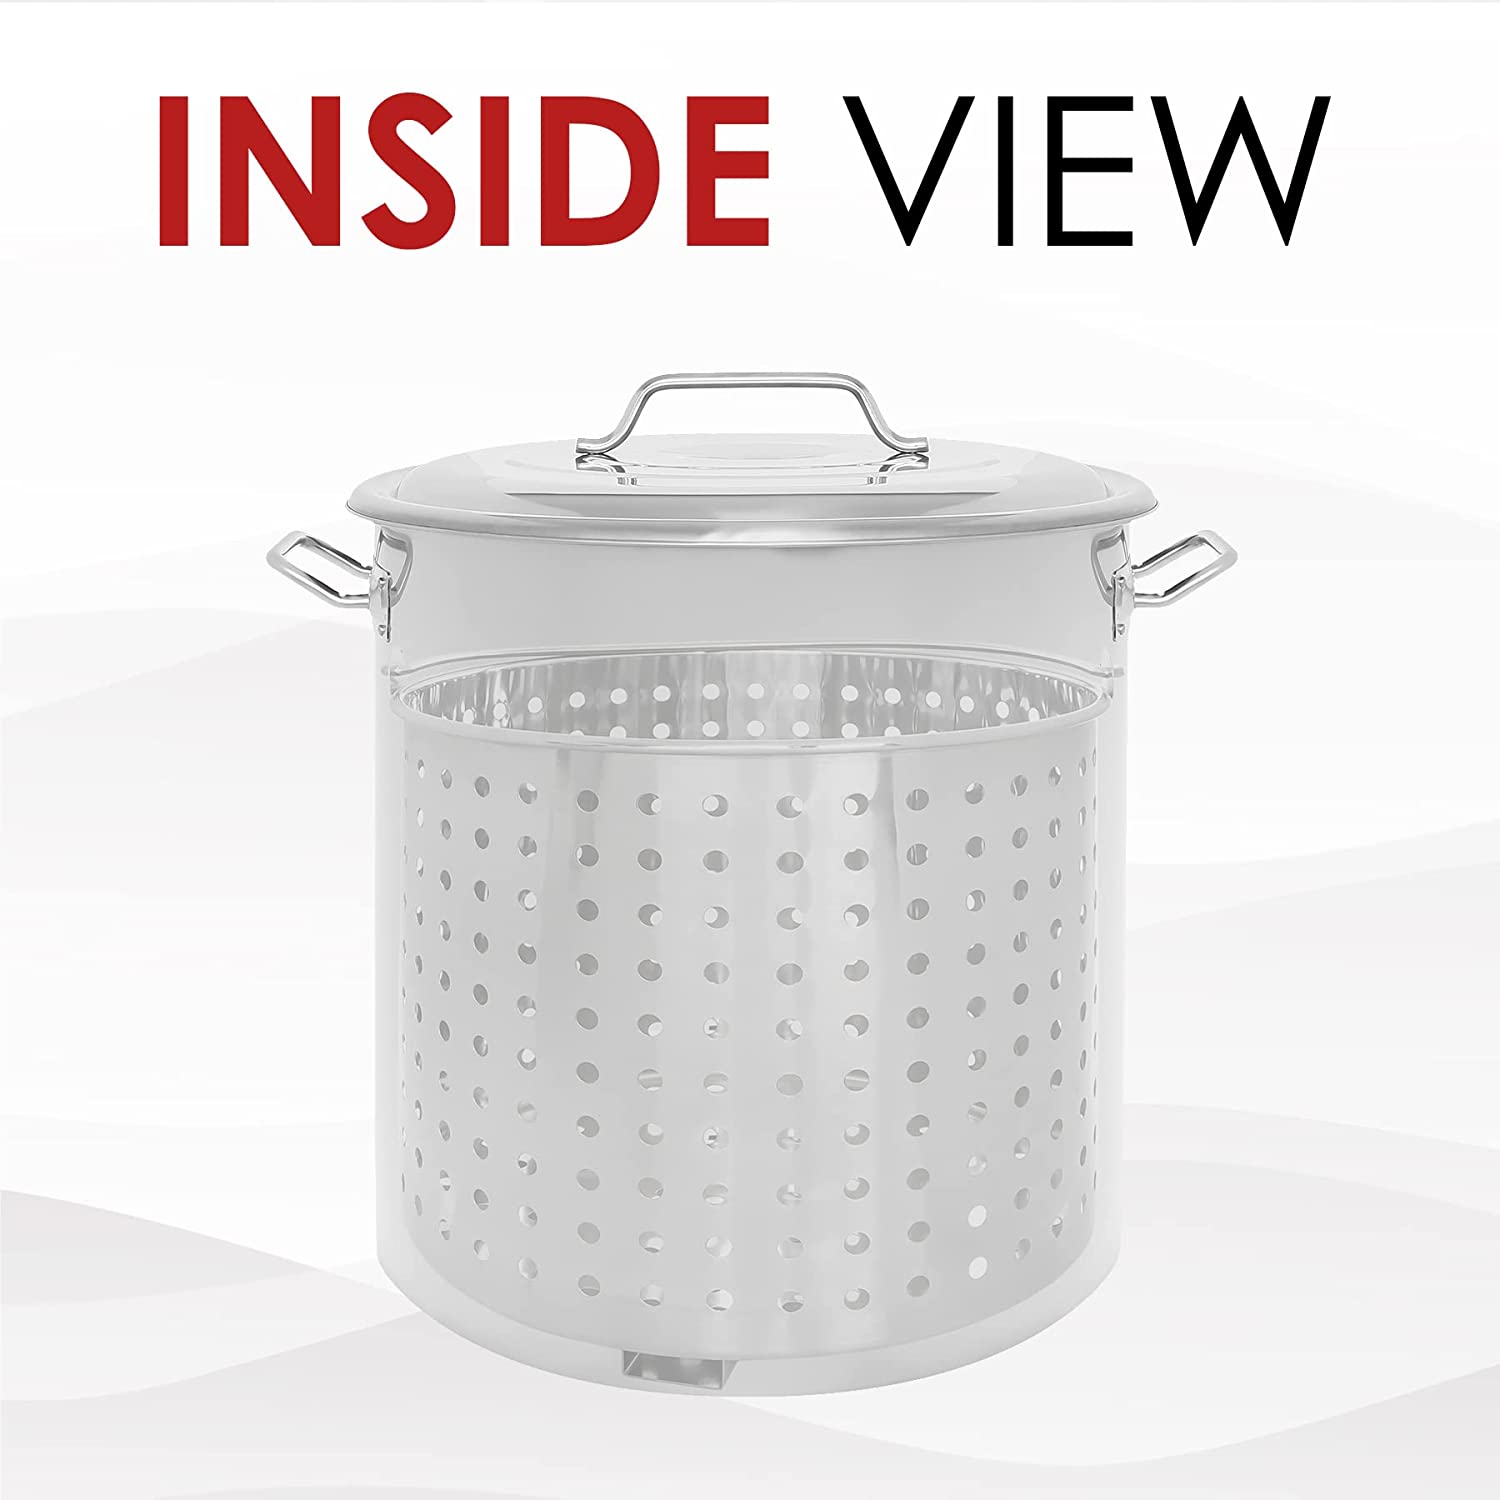 Concord 42 qt Stainless Steel Stock Pot w/Basket. Heavy Kettle. Cookware for